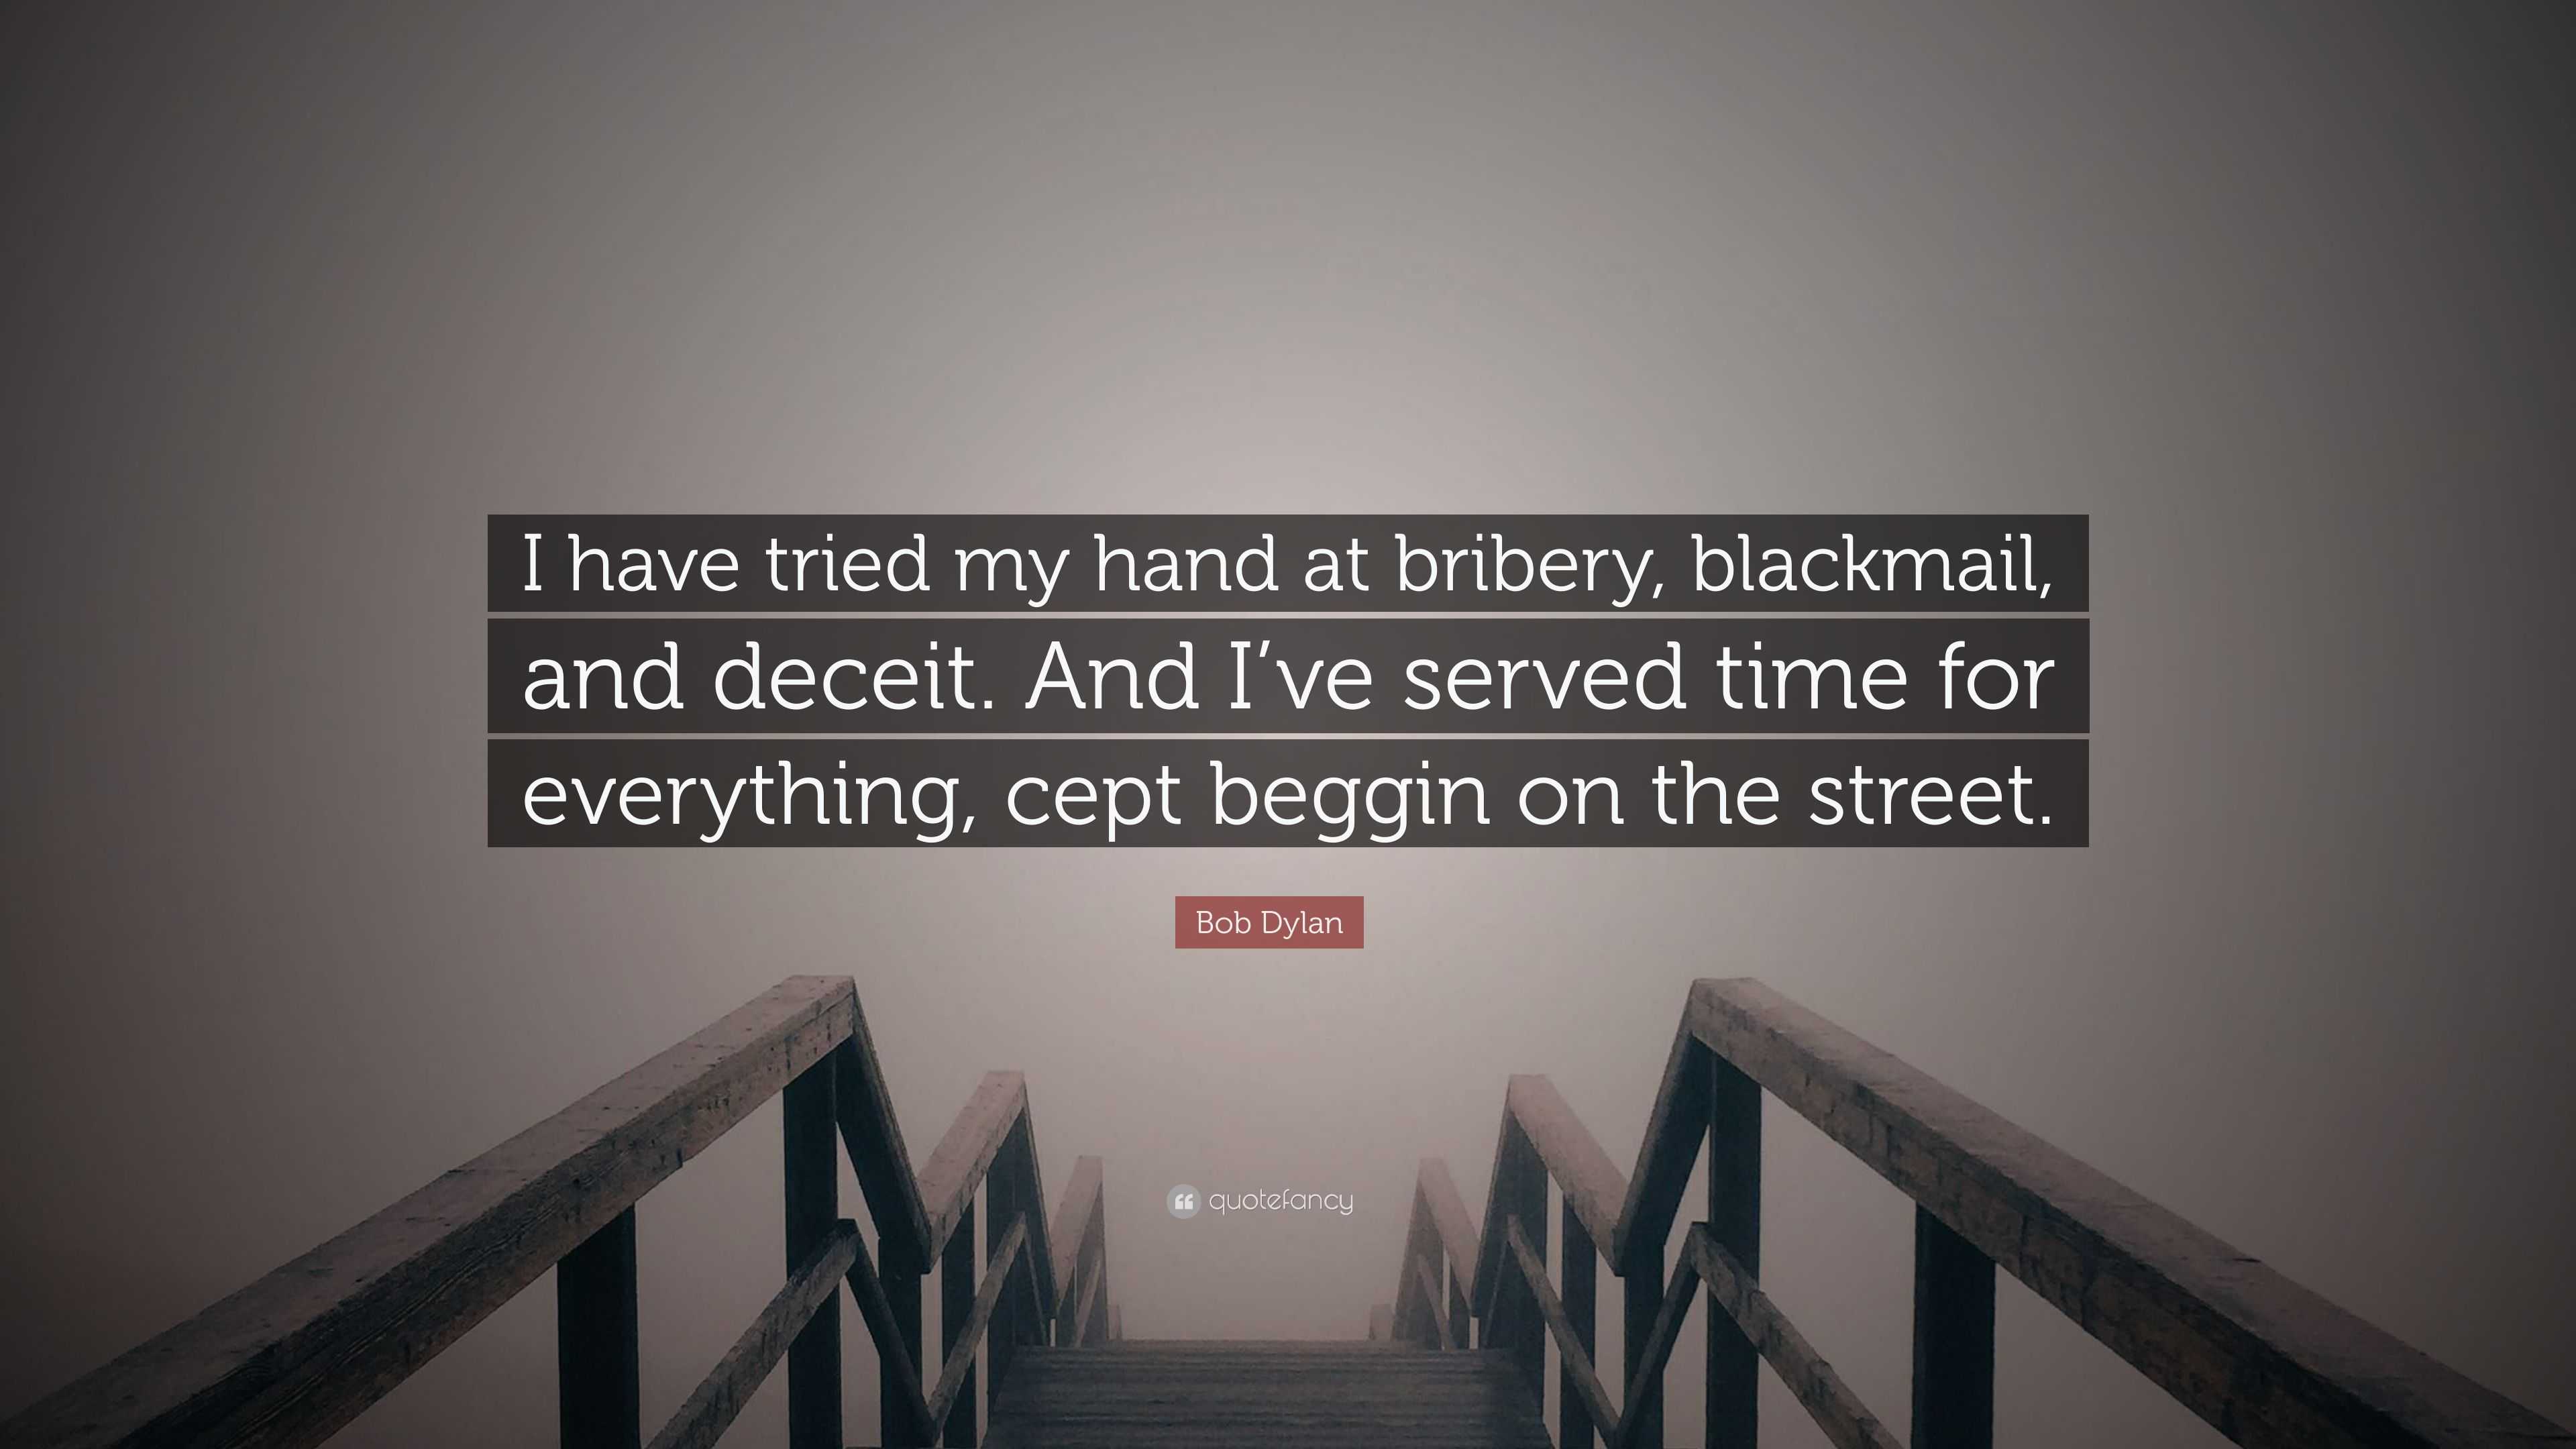 Bob Dylan Quote: “I have tried my hand at bribery, blackmail, and deceit.  And I've